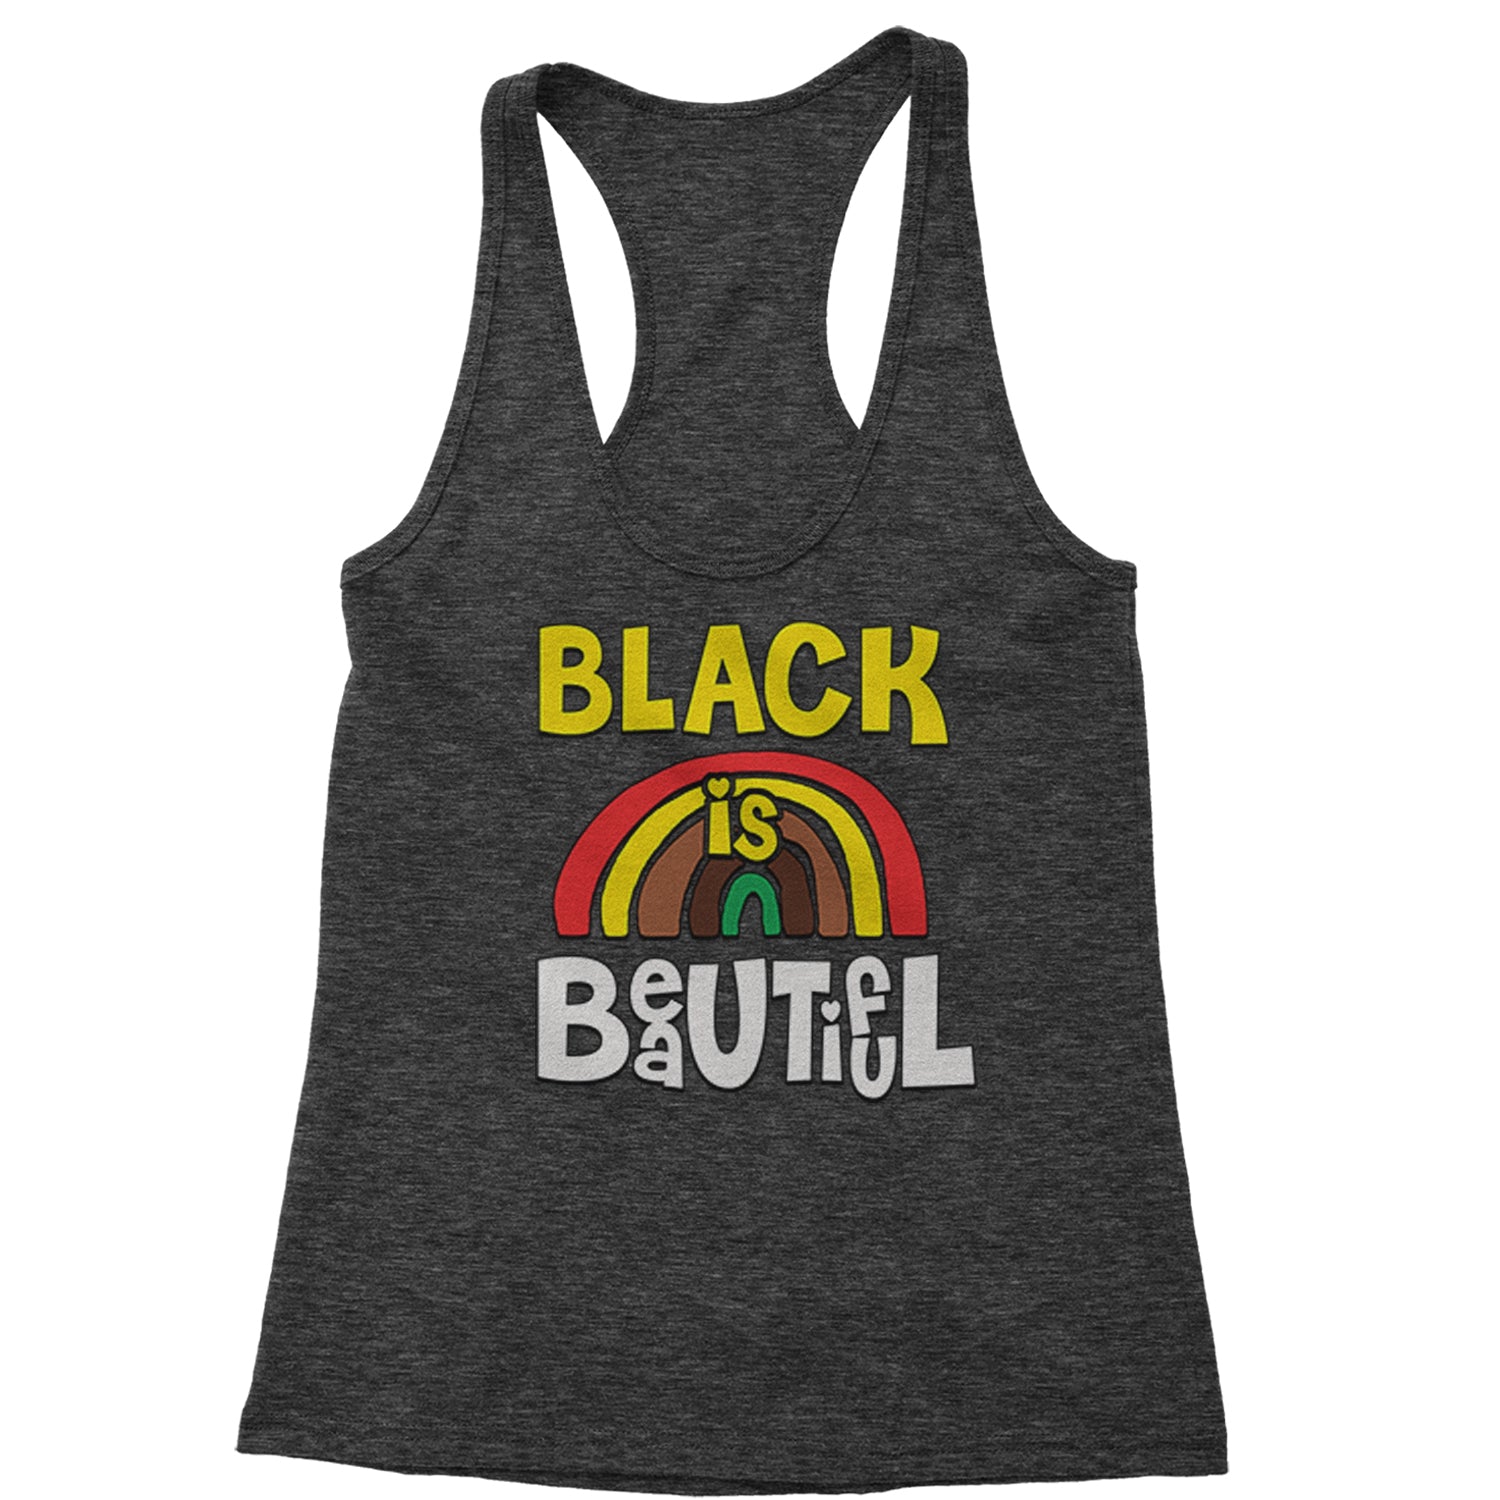 Black Is Beautiful Rainbow Racerback Tank Top for Women african, africanamerican, american, black, blackpride, blm, harriet, king, lives, luther, malcolm, march, martin, matter, parks, protest, rosa, tubman, x by Expression Tees